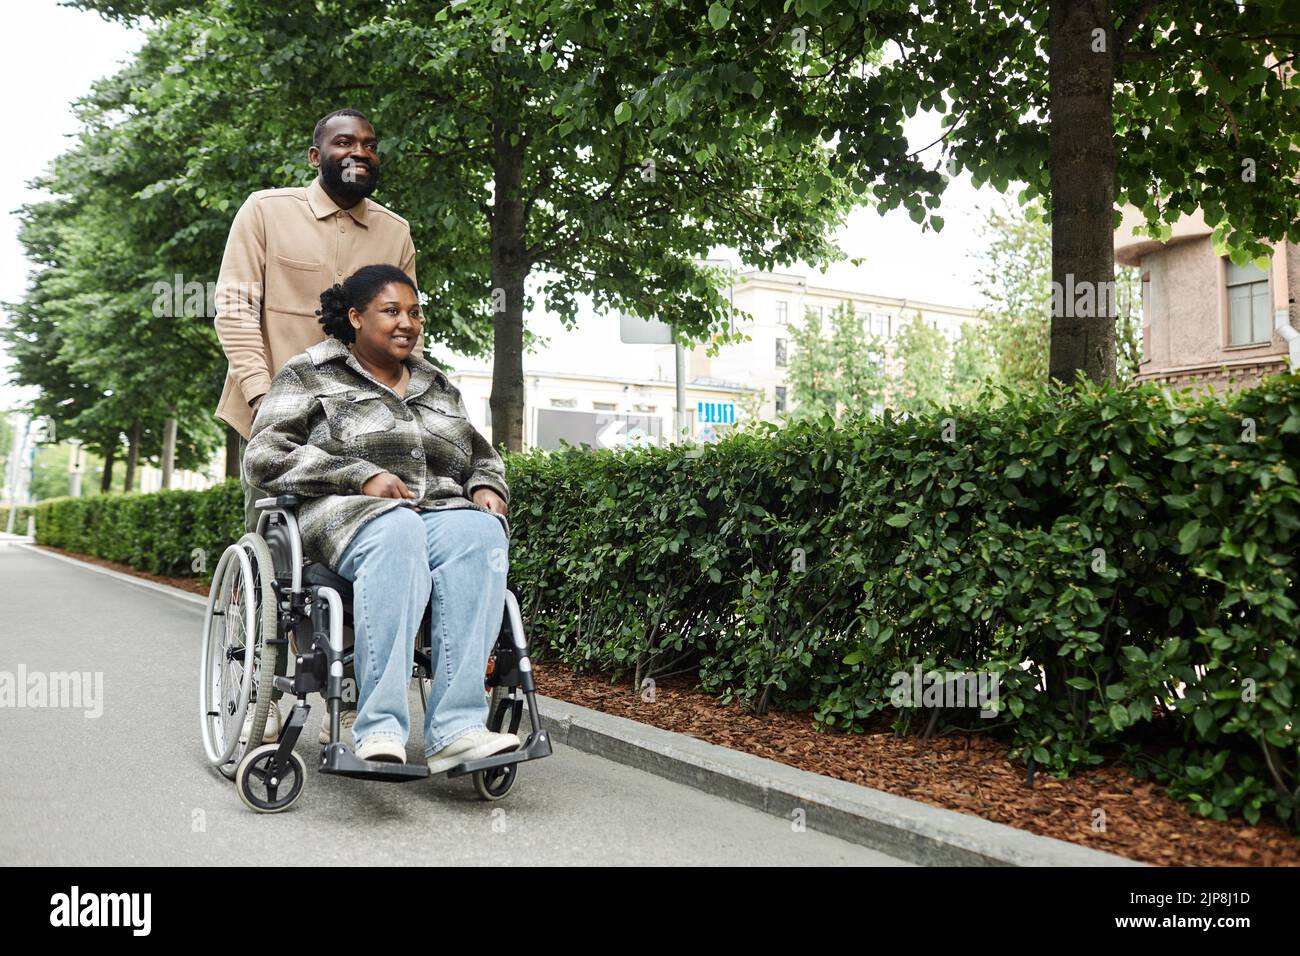 Full length portrait of happy adult couple with partner in wheelchair enjoying walk outdoors in city park, copy space Stock Photo